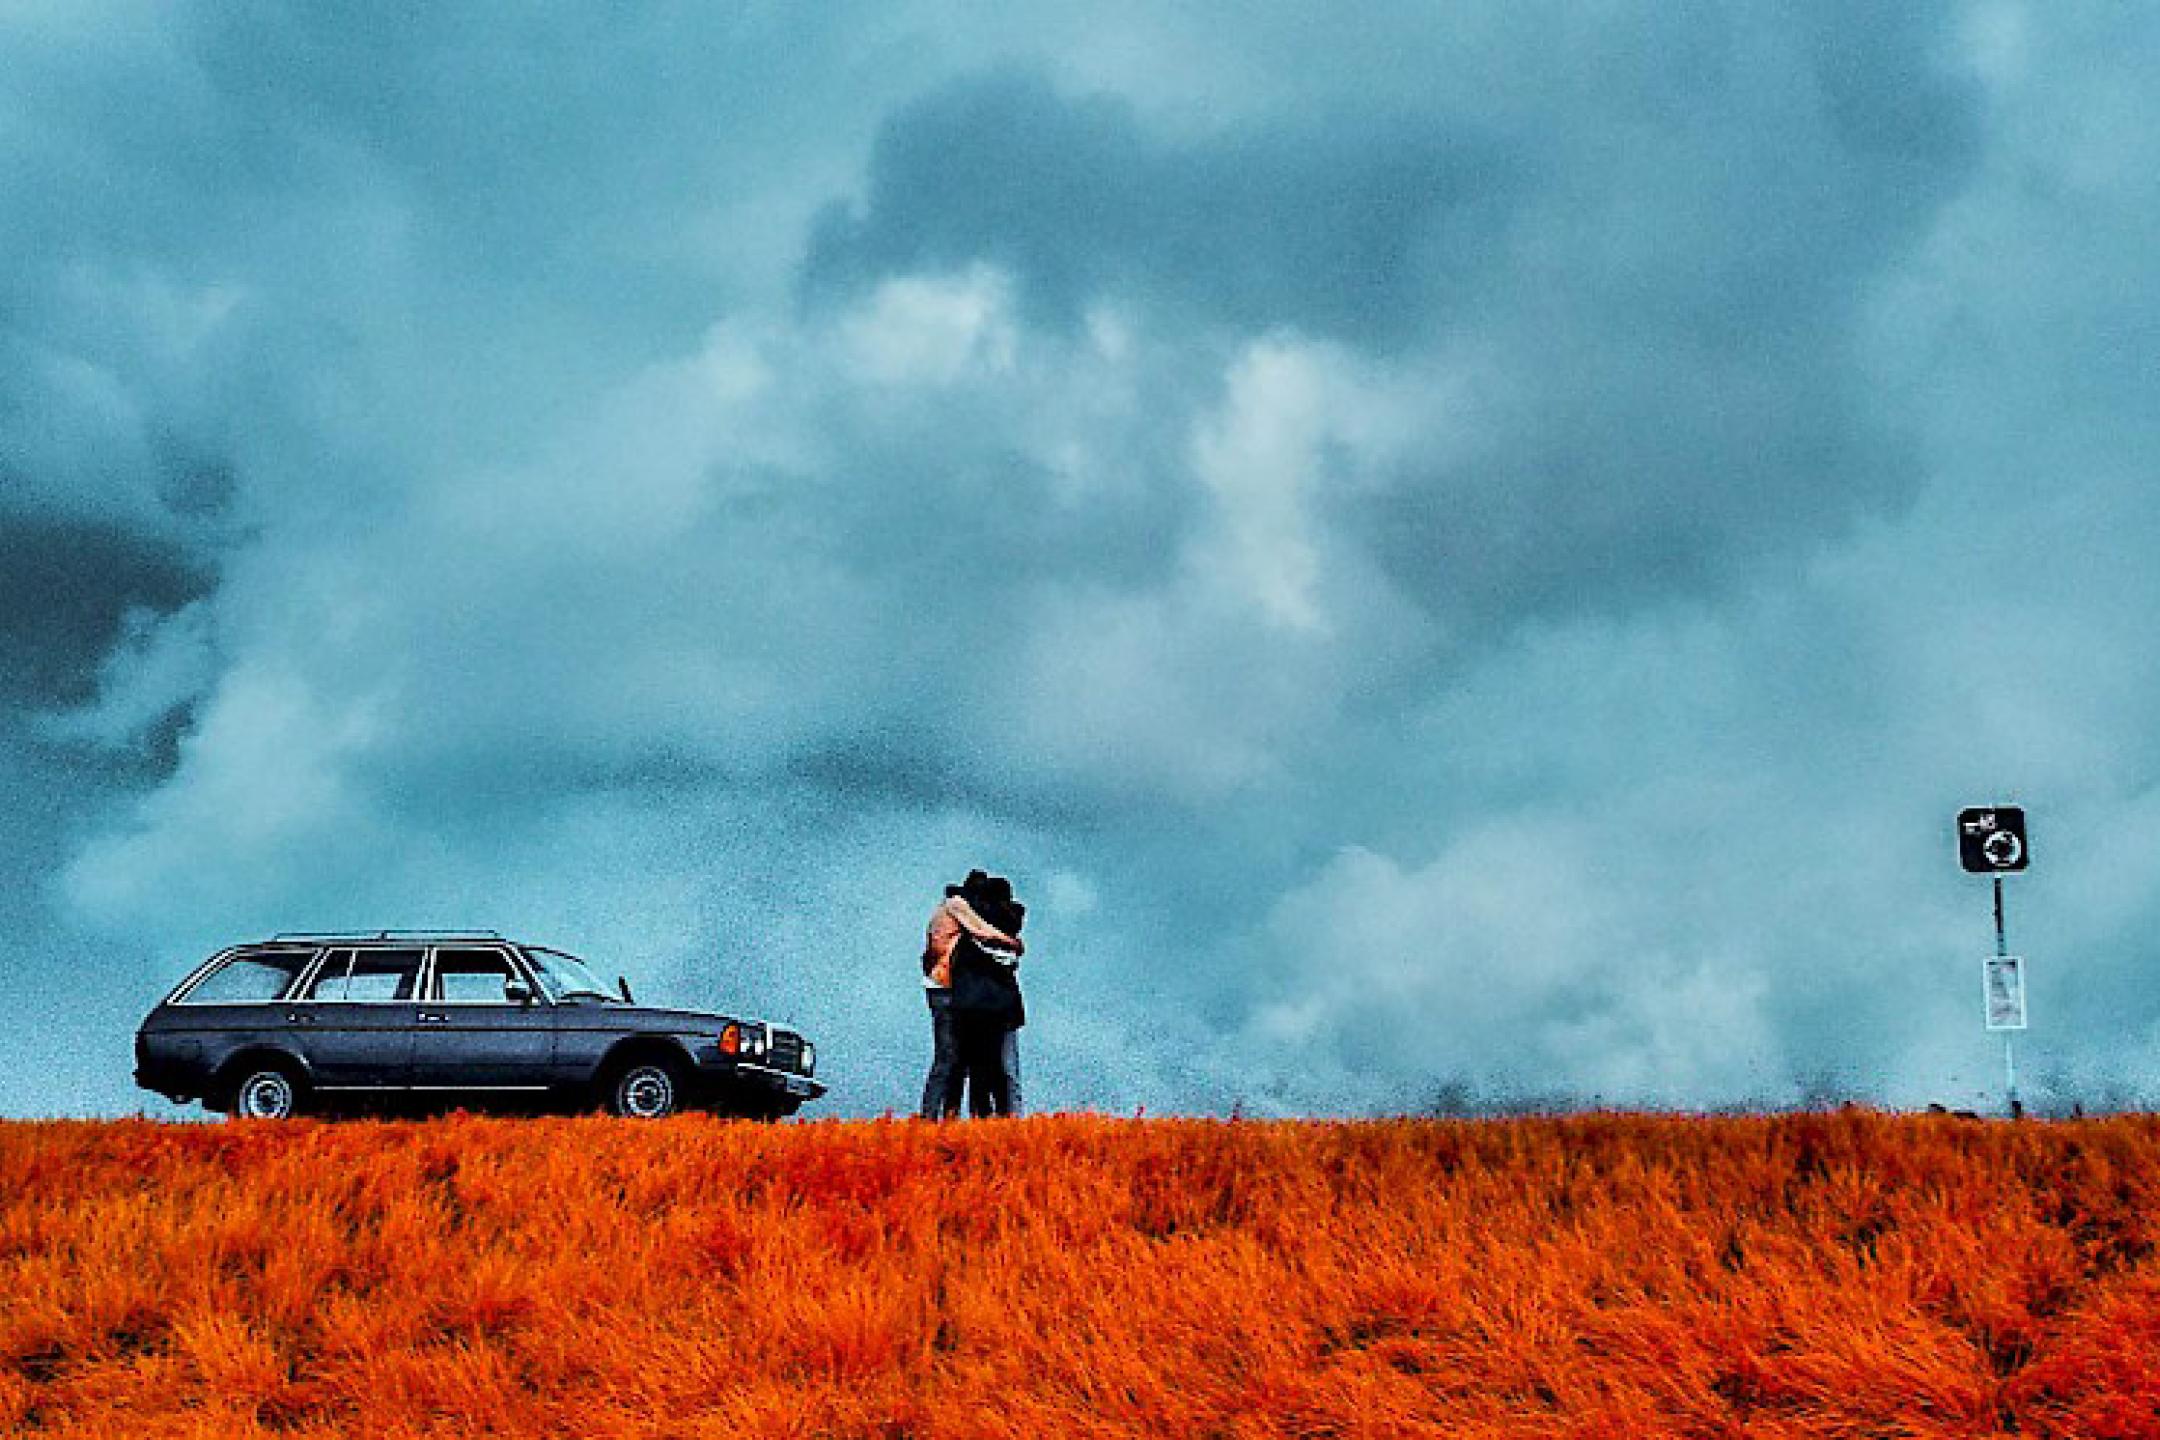 A wide corn field under a thunderstorm sky. A couple stands in the field, hugging each other. On the side parks a car.